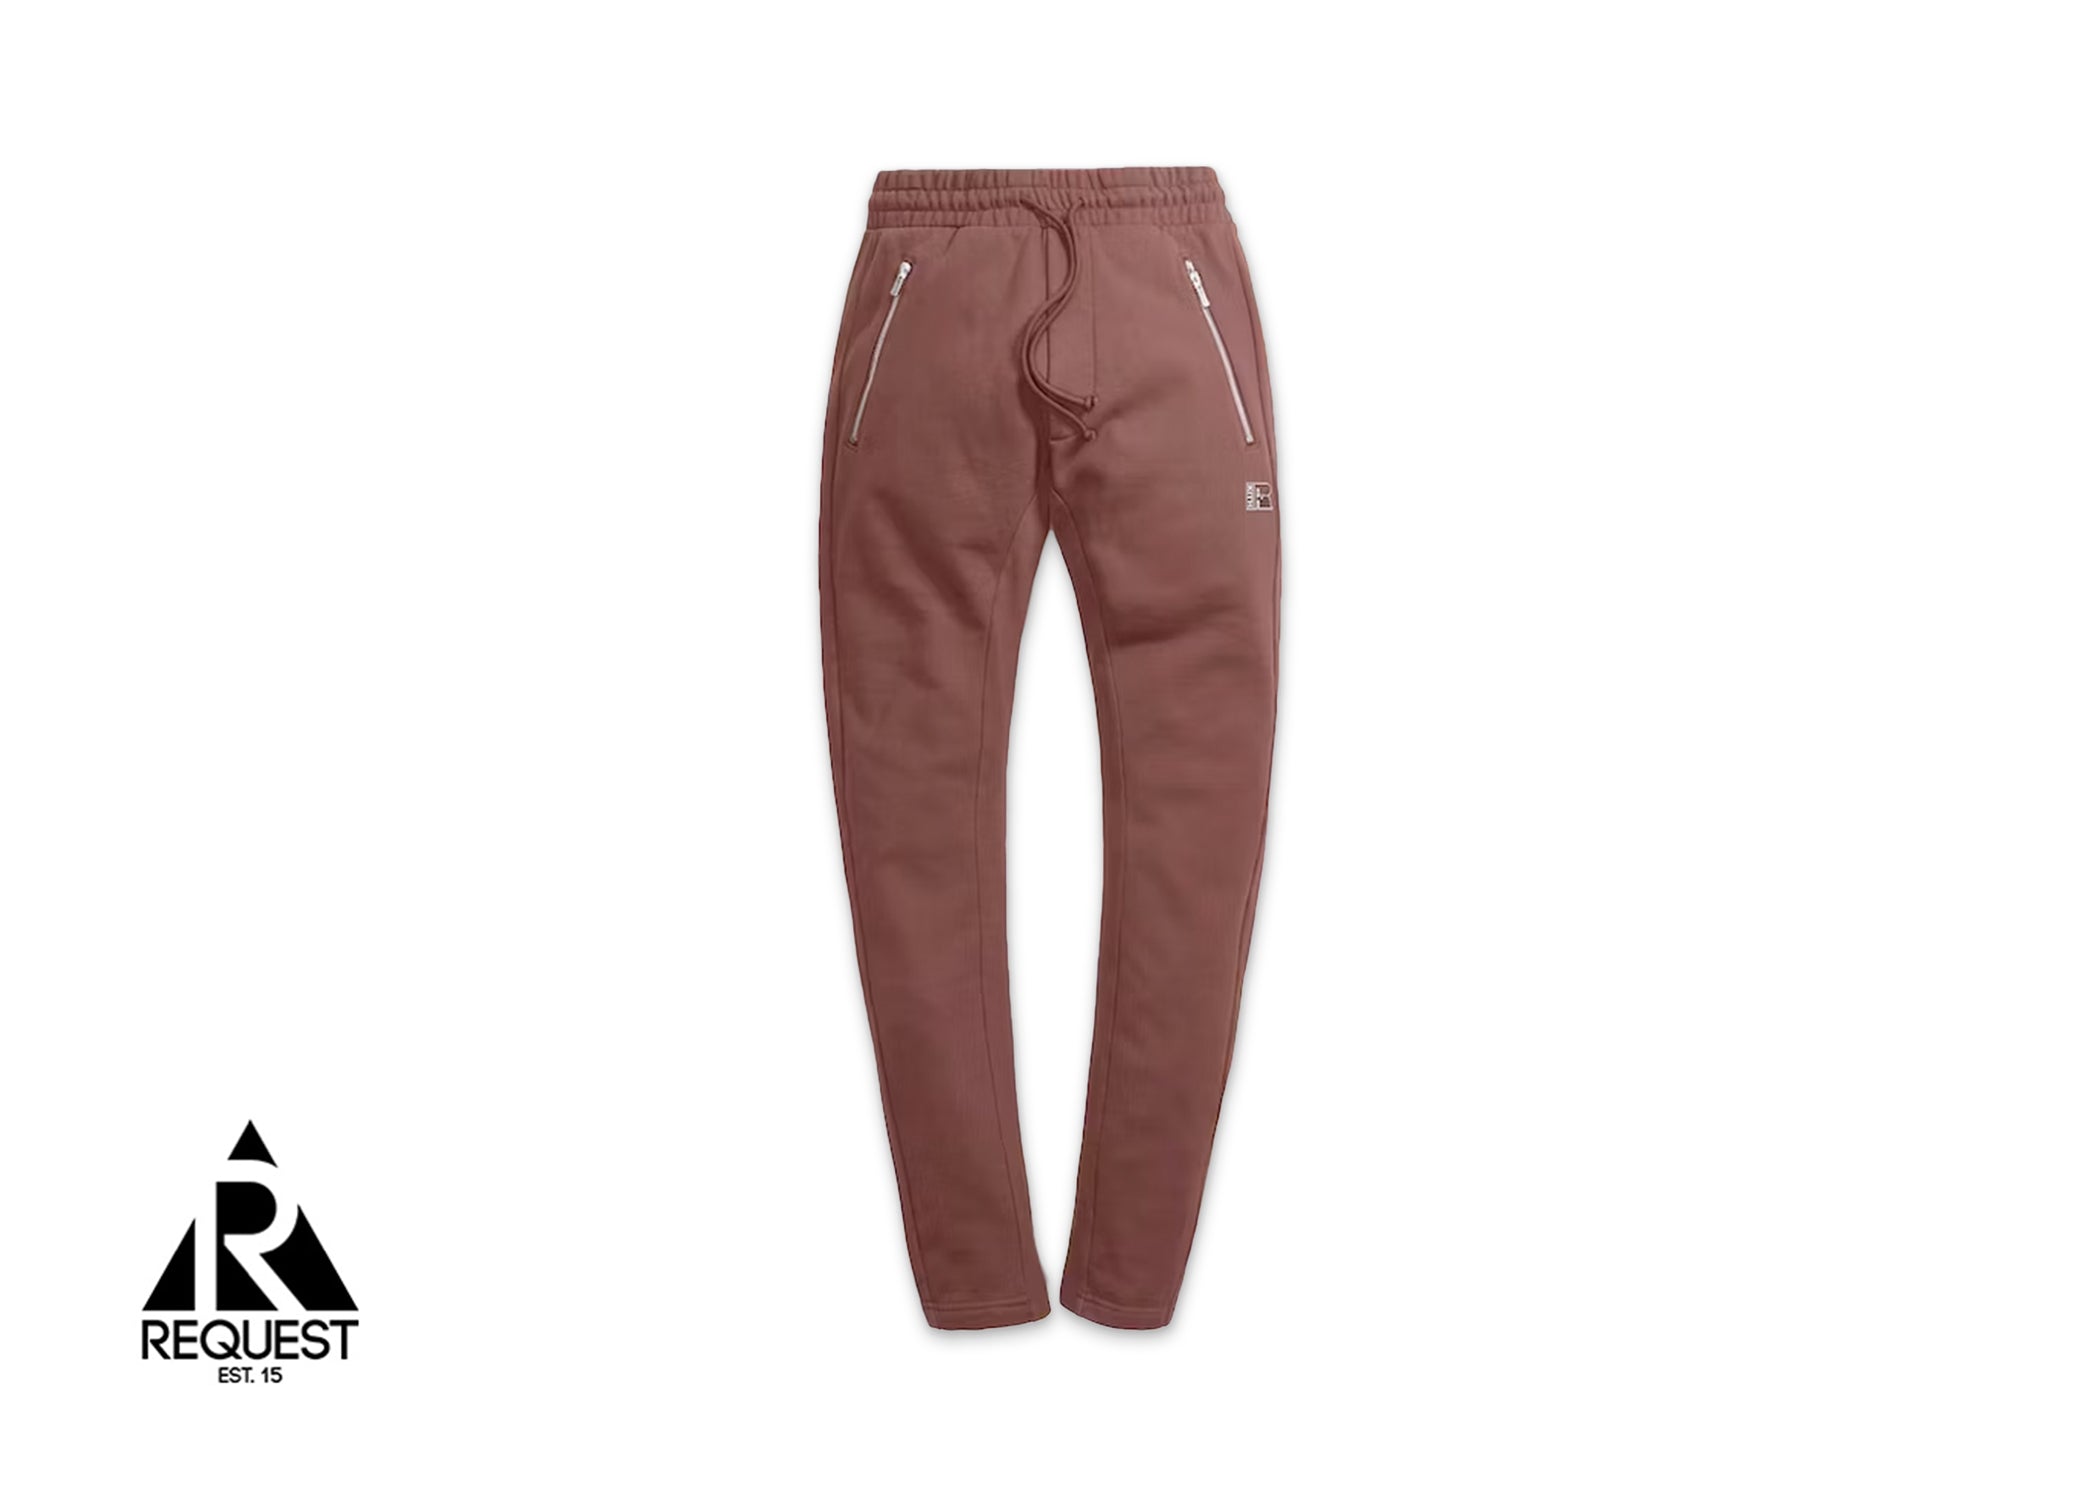 Kith For Russell Athletic Bleeker Sweatpants "Rogue"